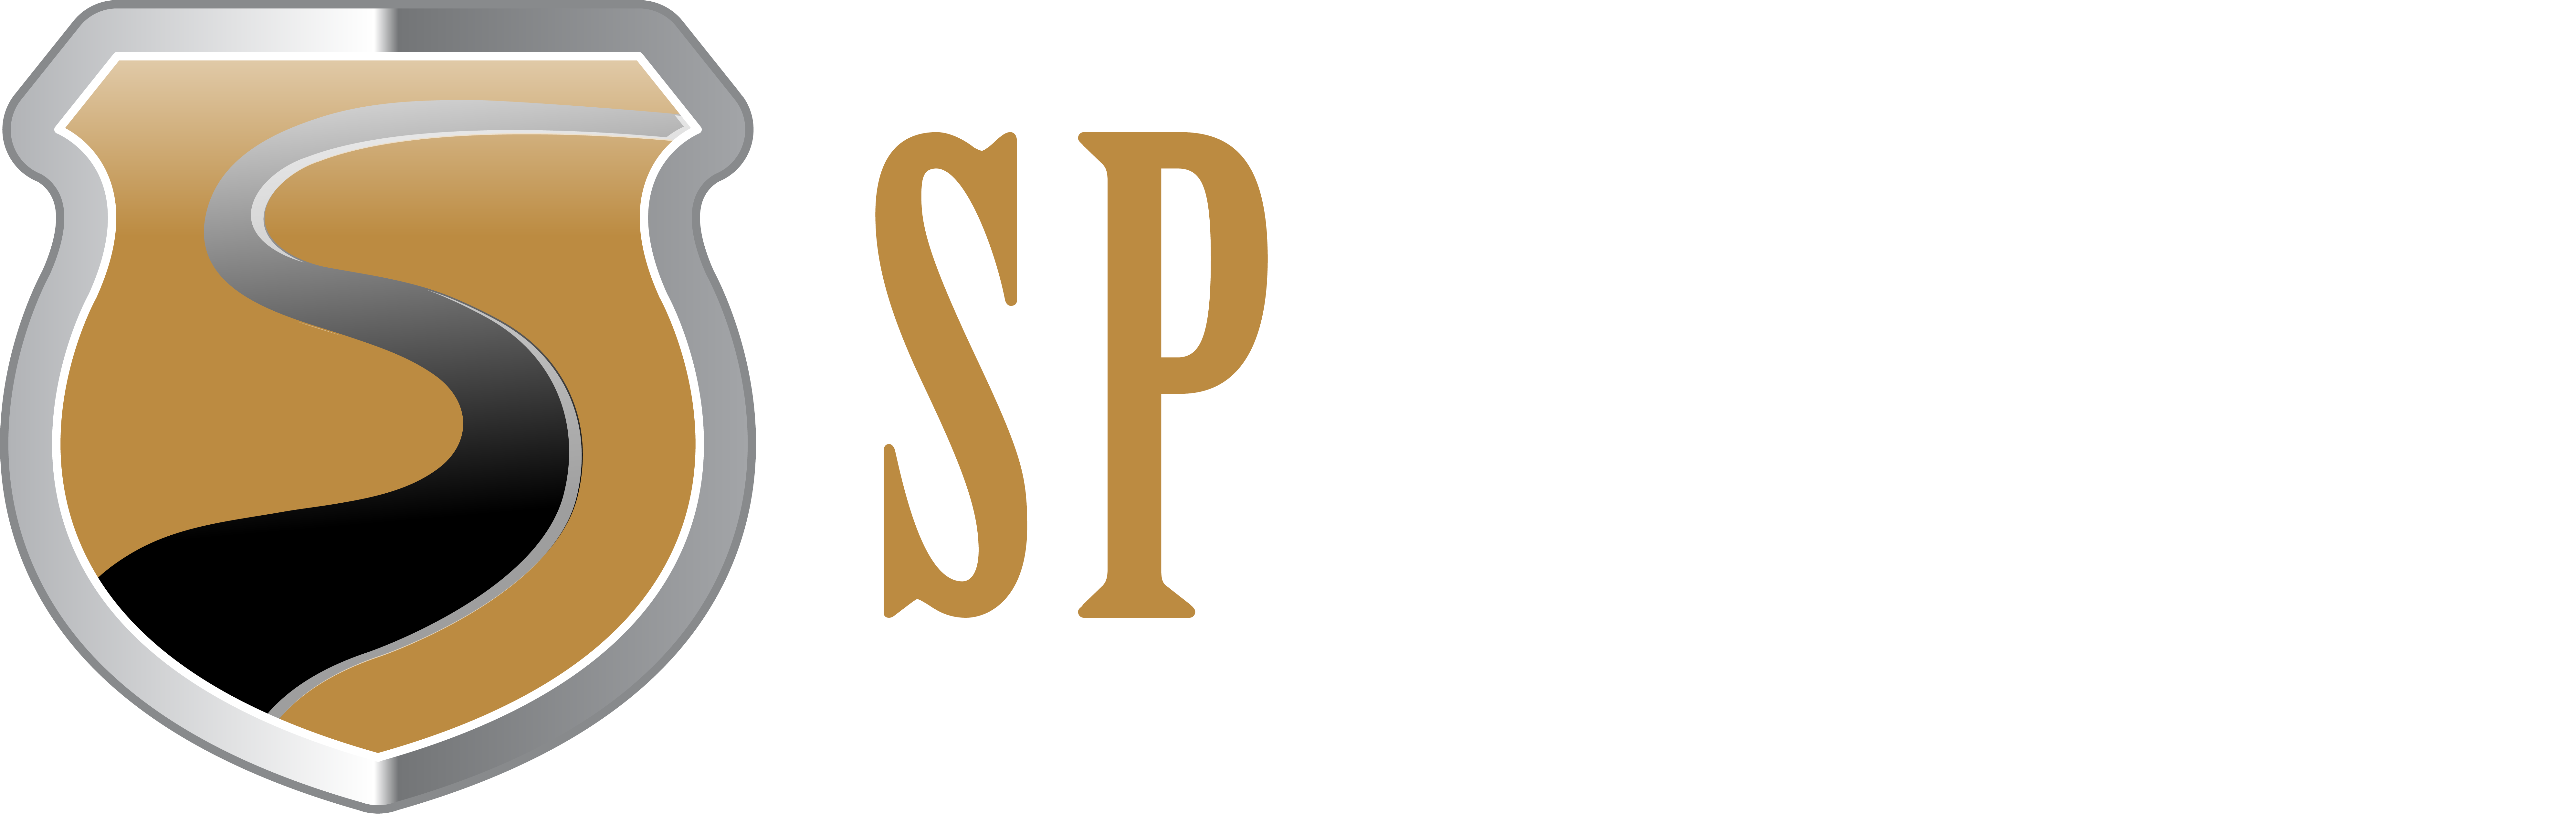 SP FUNDS